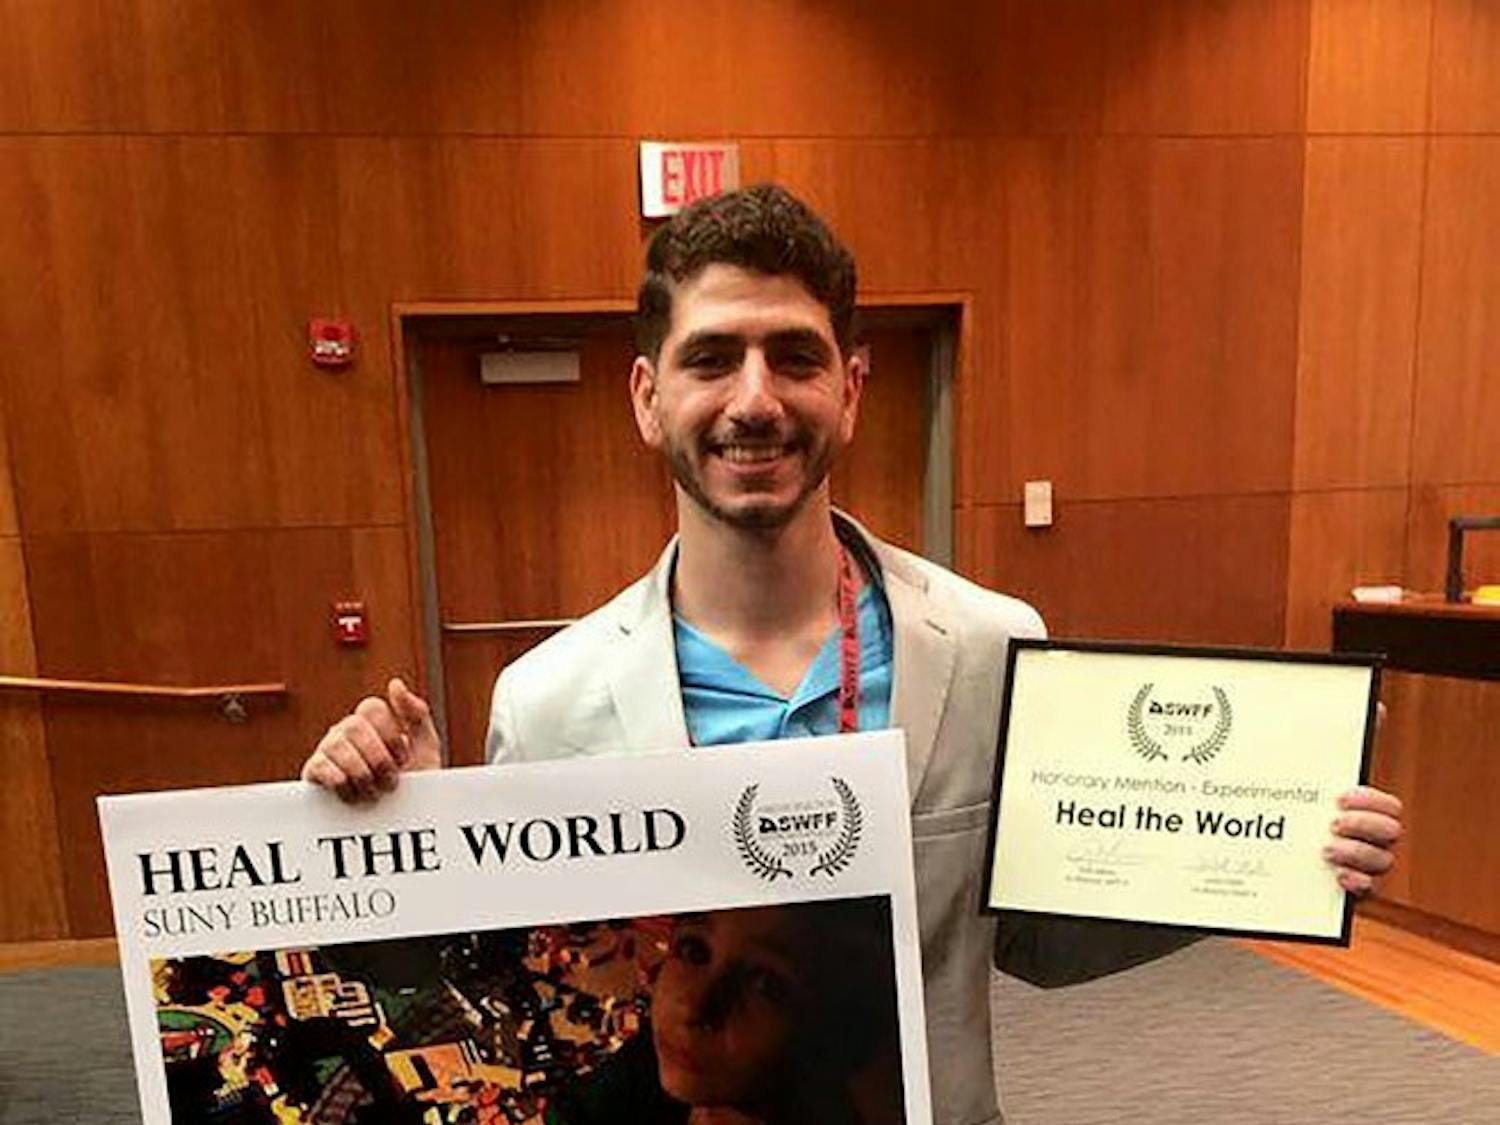 Akram Shibly represented Buffalo at the SUNYWide Film Festival this weekend, taking home an honorable mention for his film Heal the World.